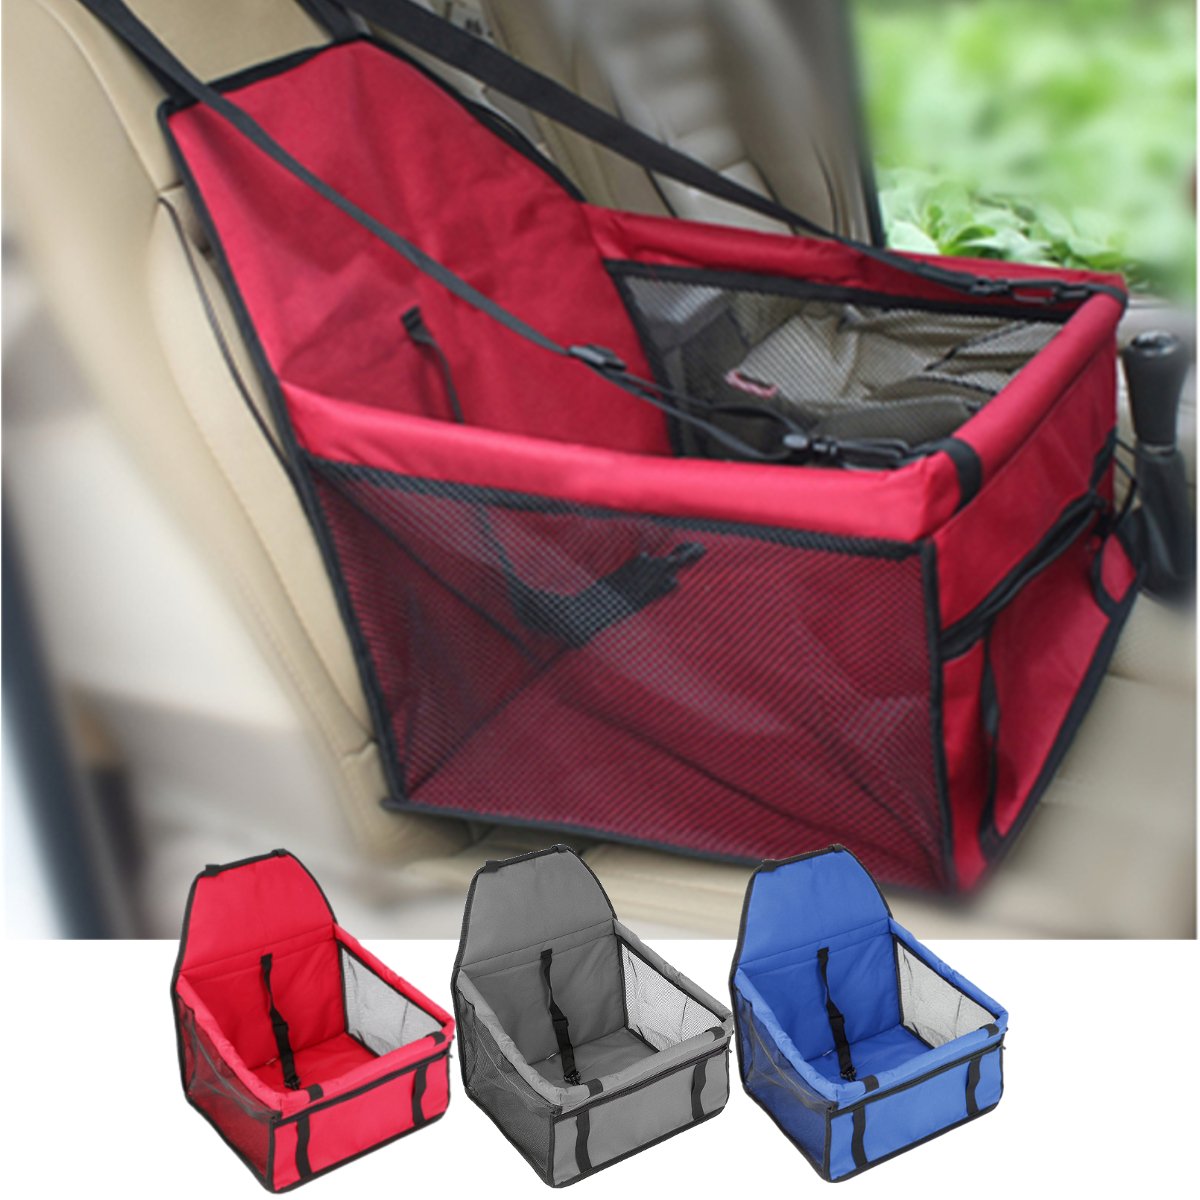 Car-Seat-Carrier-For-Cats-and-Dogs-Pets-Lookout-Carrier-Zipper-Storage-Pocket-Portable-Carrier-Bag-1165678